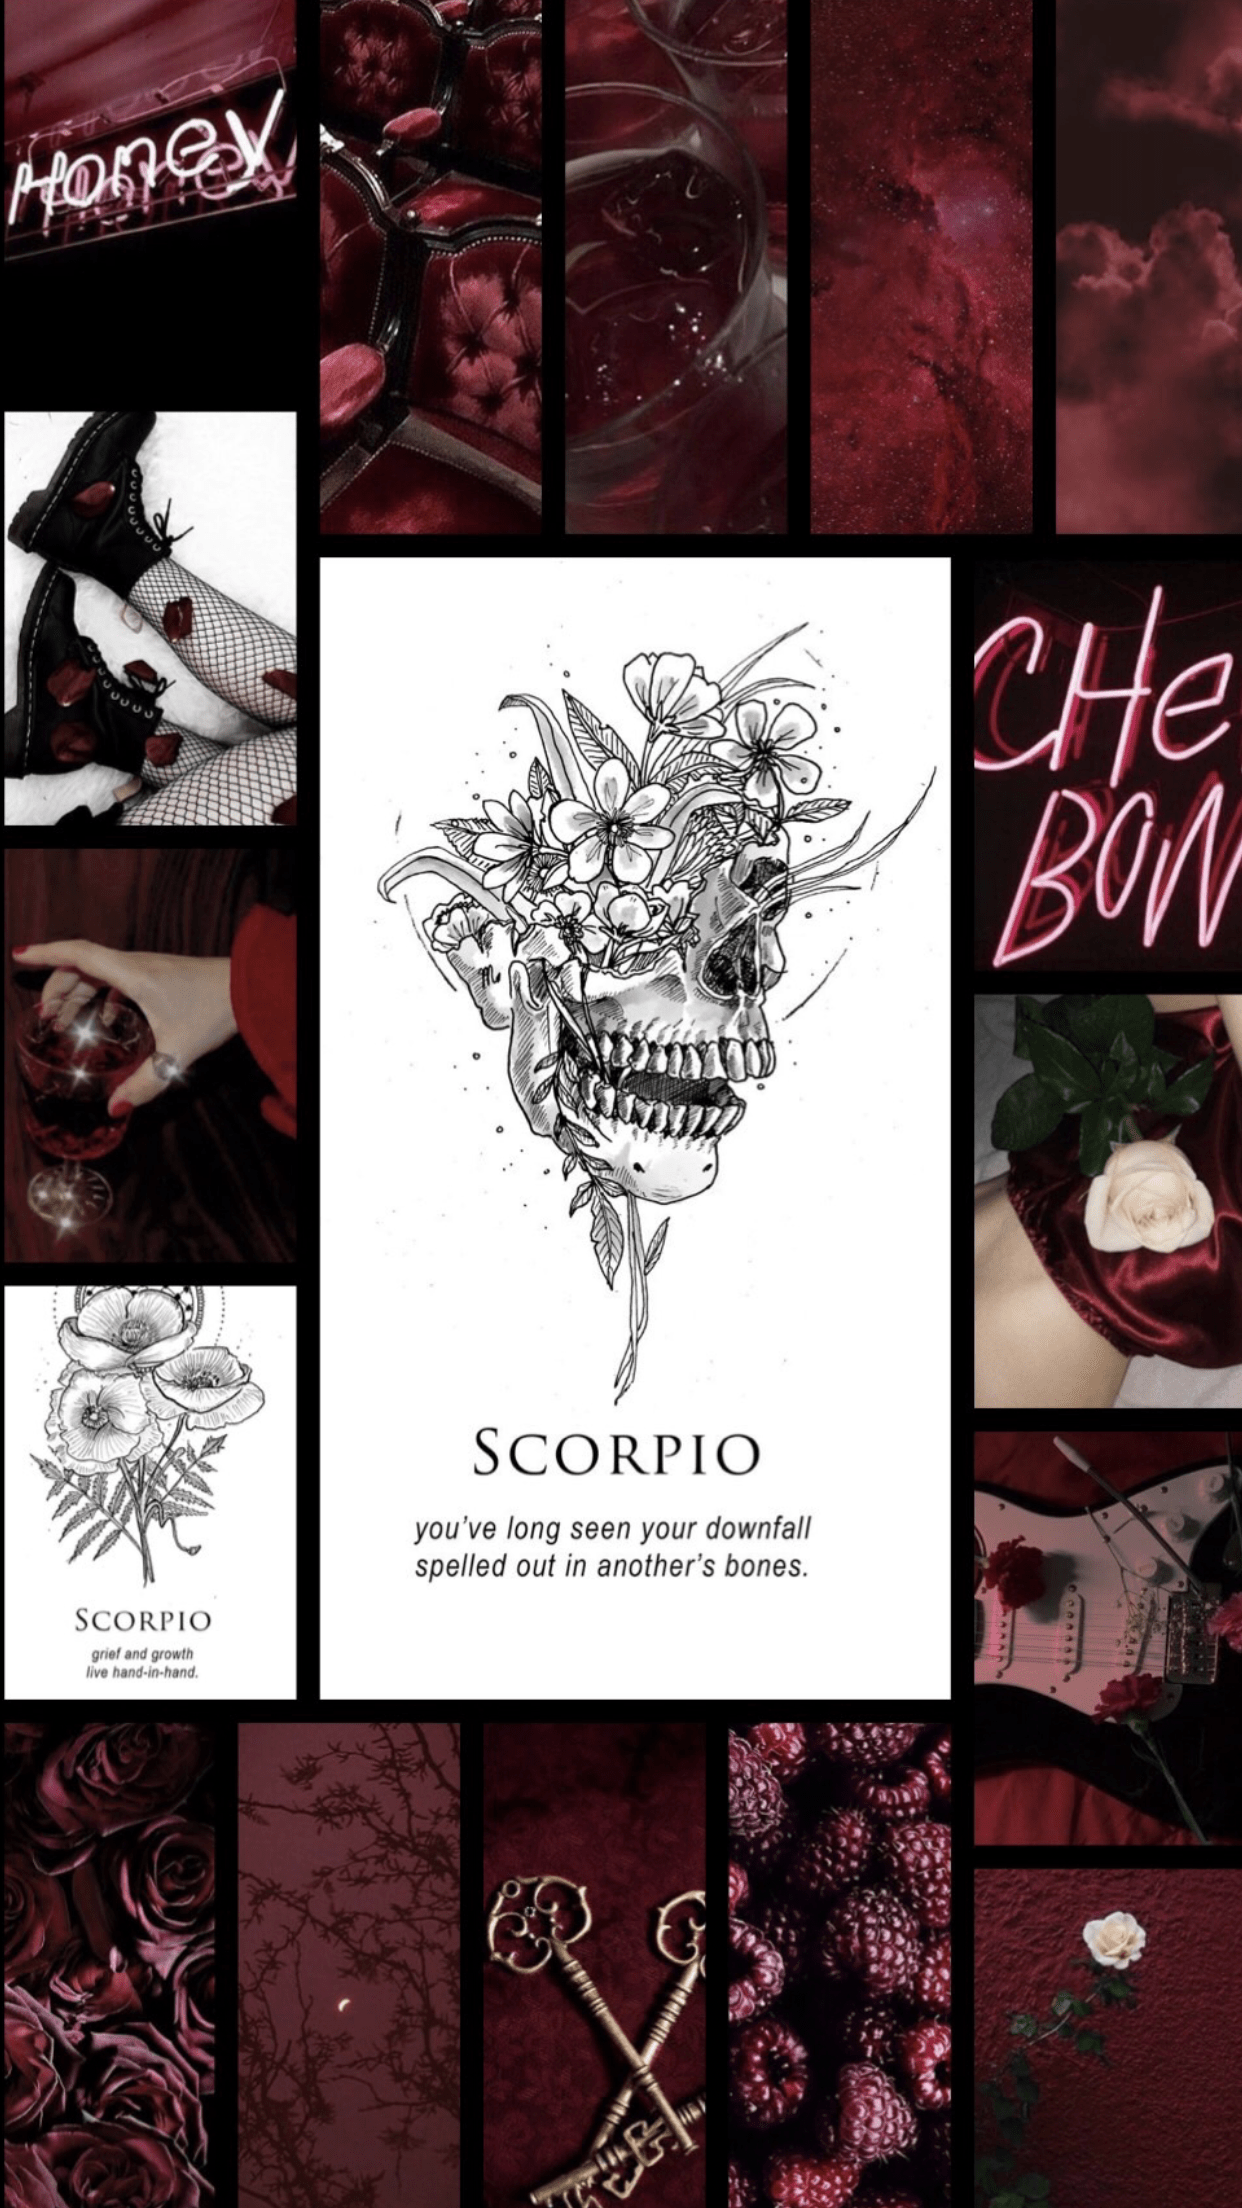 A collage of images of Scorpio including a skull - Scorpio